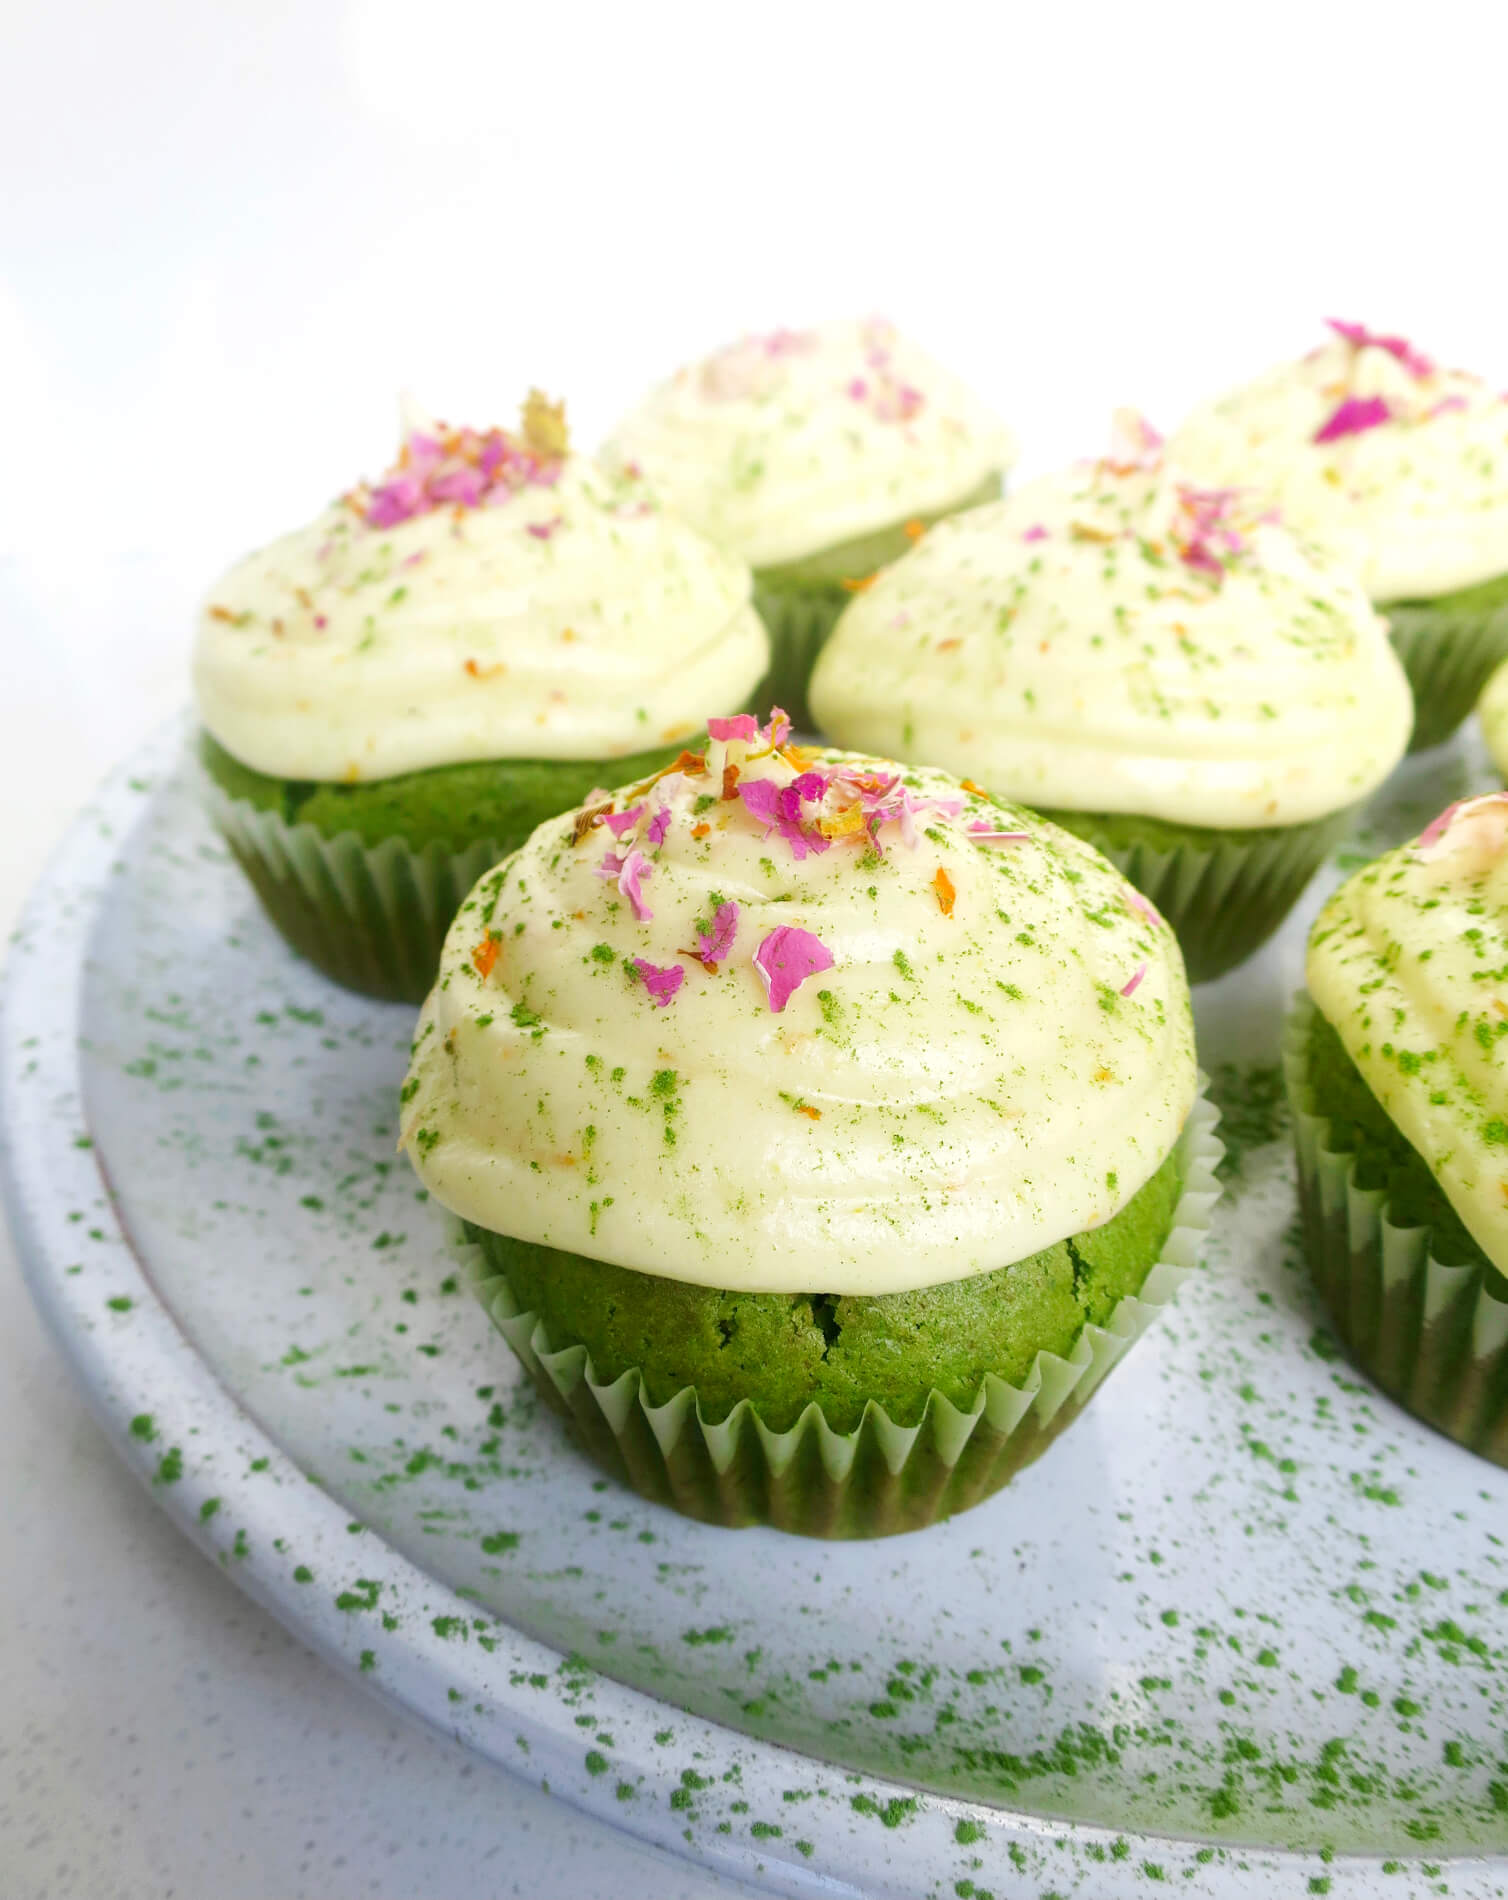 LolaMillieEats' Just Matcha Cupcakes with Orange Frosting